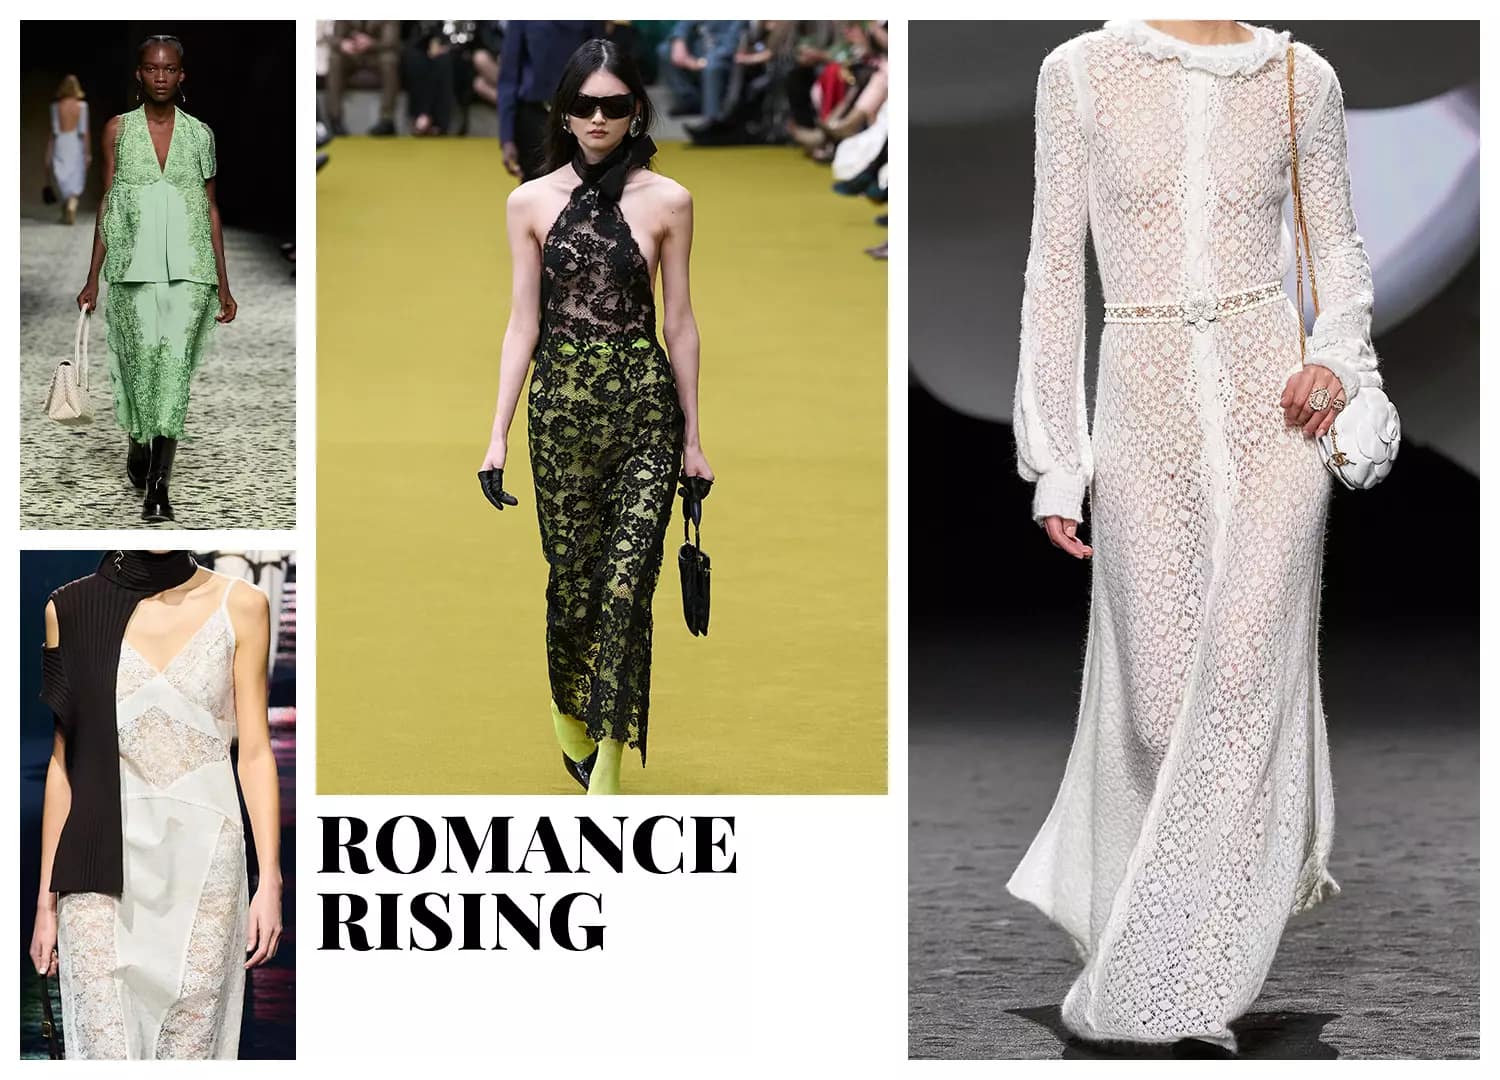 Read more about the article The Key Fall 2023 Trends We’re Investing In: The Key Fall 2023 Fashion Trends, According to Editors and Experts | Marie Claire by https://www.marieclaire.com/author/sara-holzman/